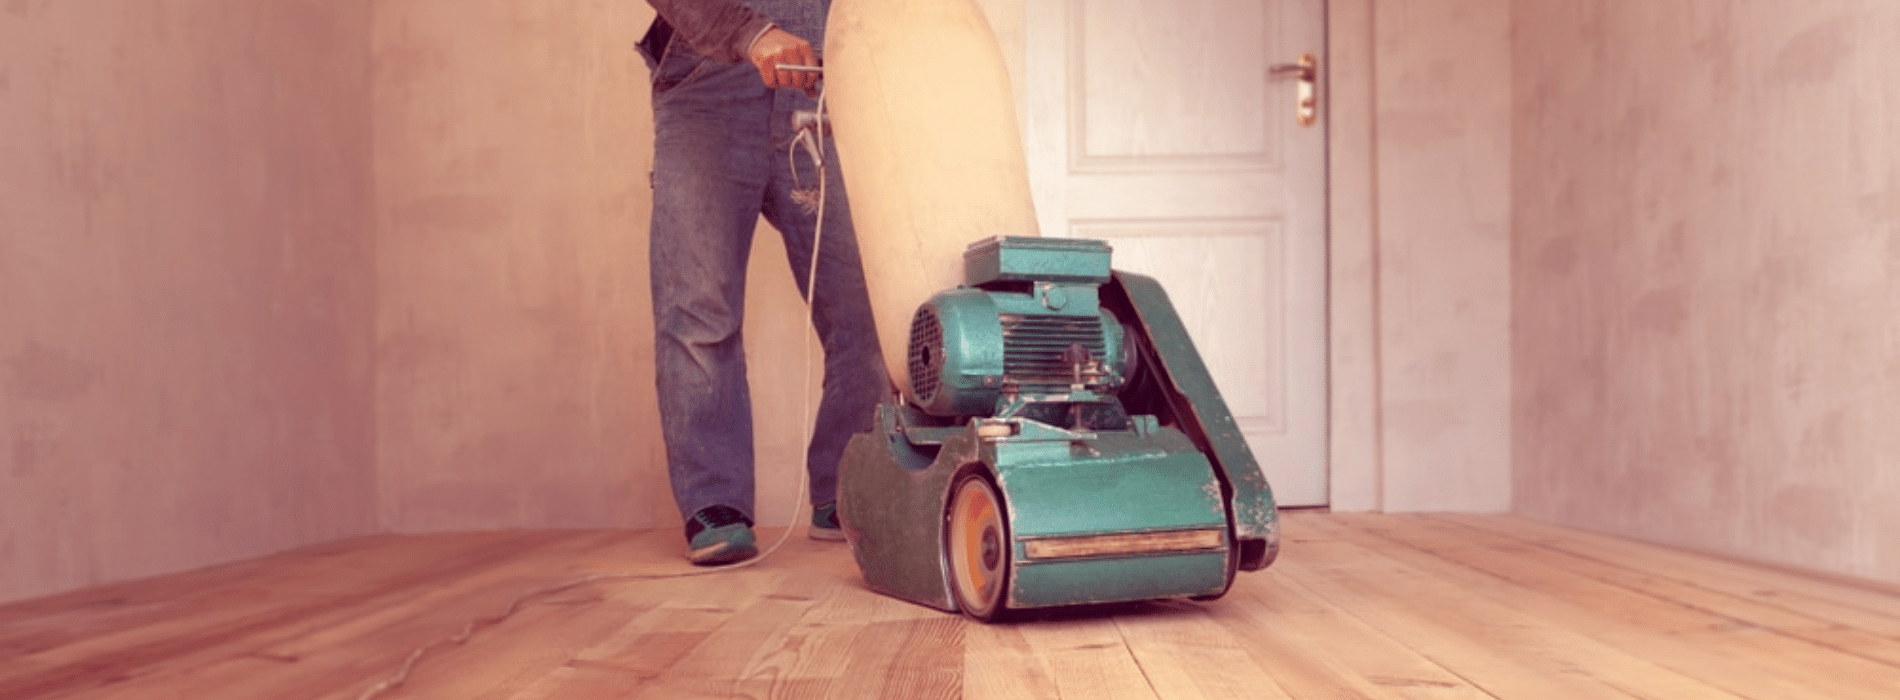 Mr Sander® in Lee, SE12, expertly sand herringbone floors using a Bona Scorpion drum sander. With a dimension of 200 mm, it delivers a powerful 1.5 kW effect. Operating at 240 V and 50 Hz, it is connected to a dust extraction system with a HEPA filter for a thorough and efficient result. 